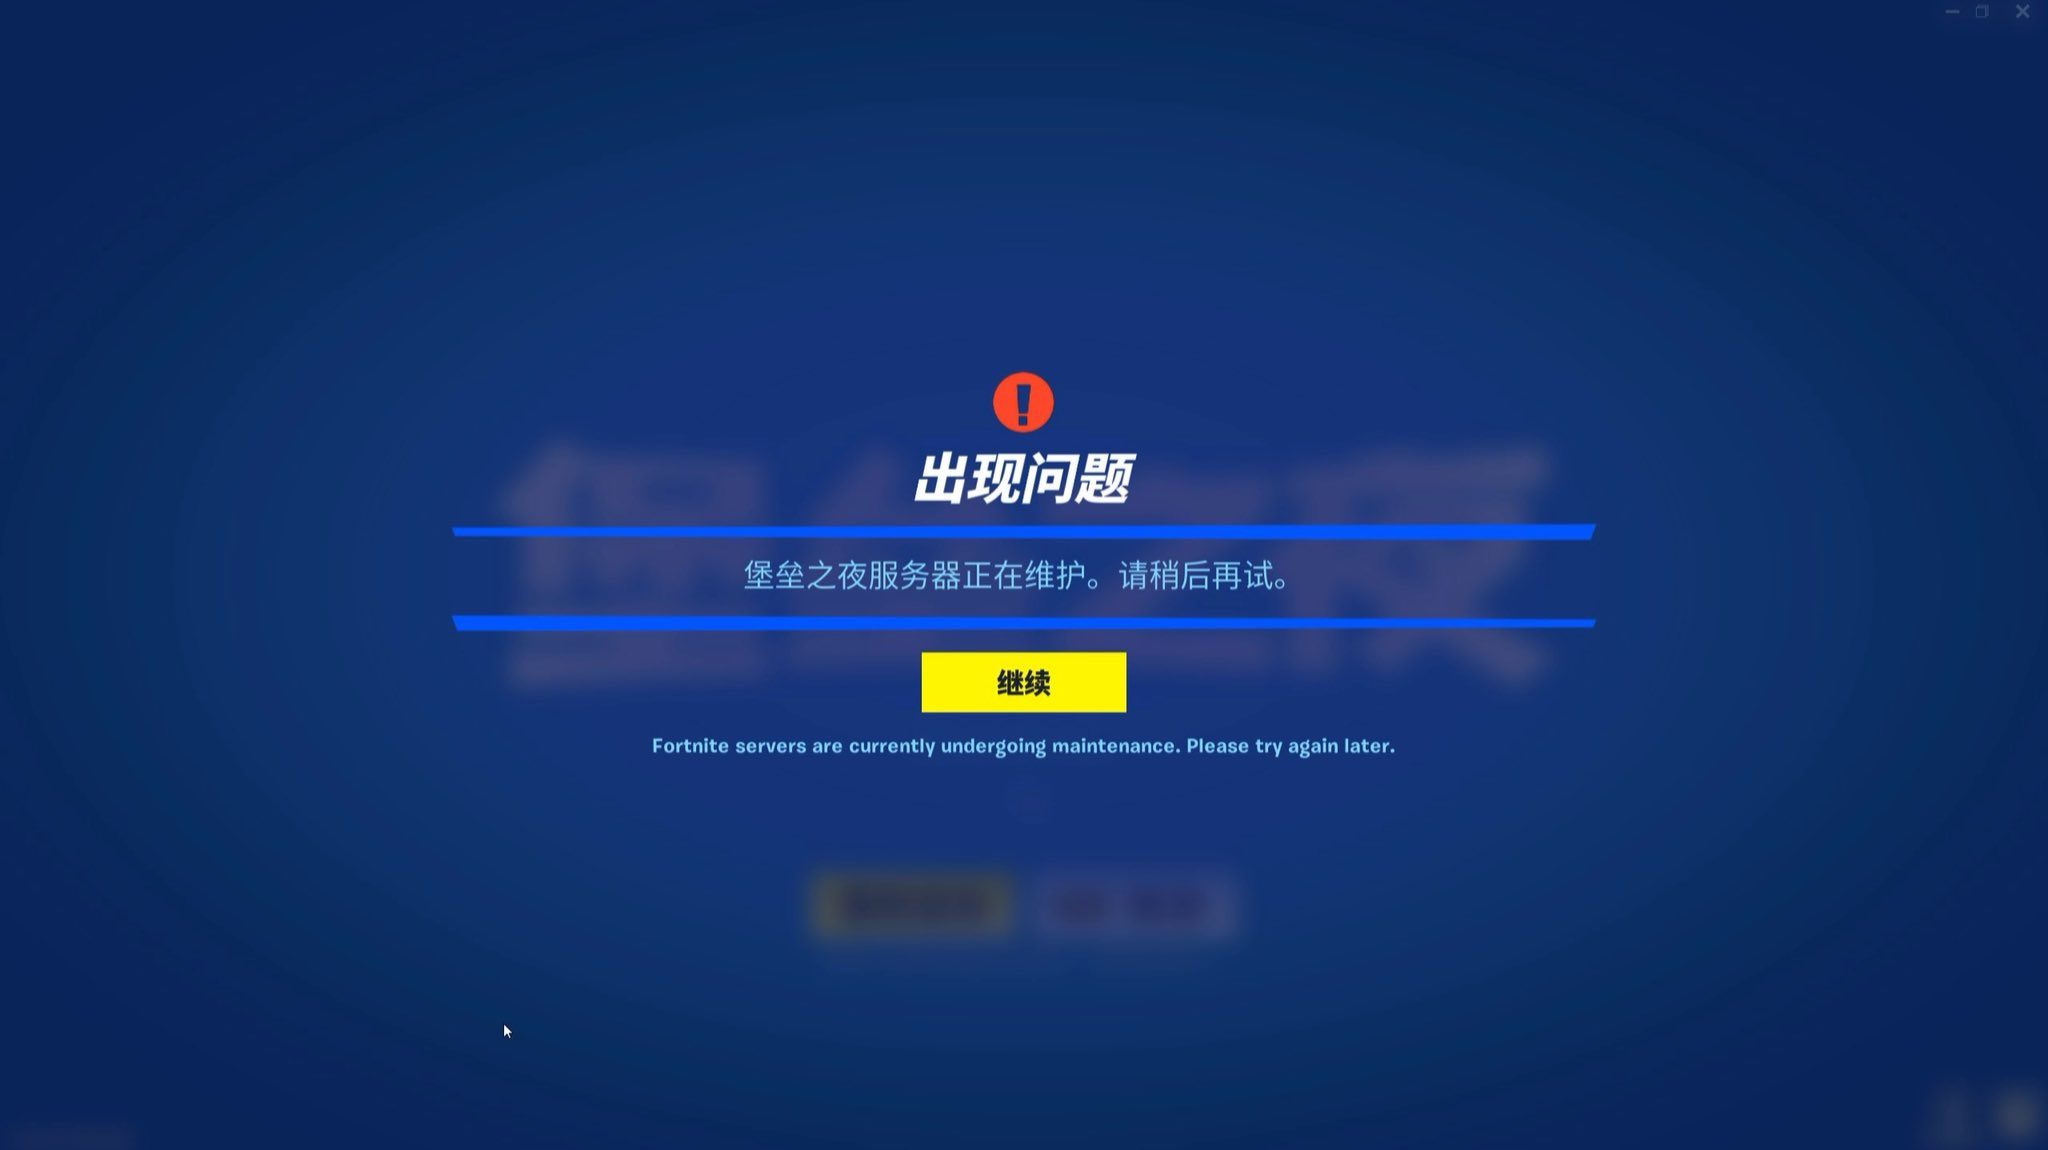 Fortnite ends China test, shuts down game servers